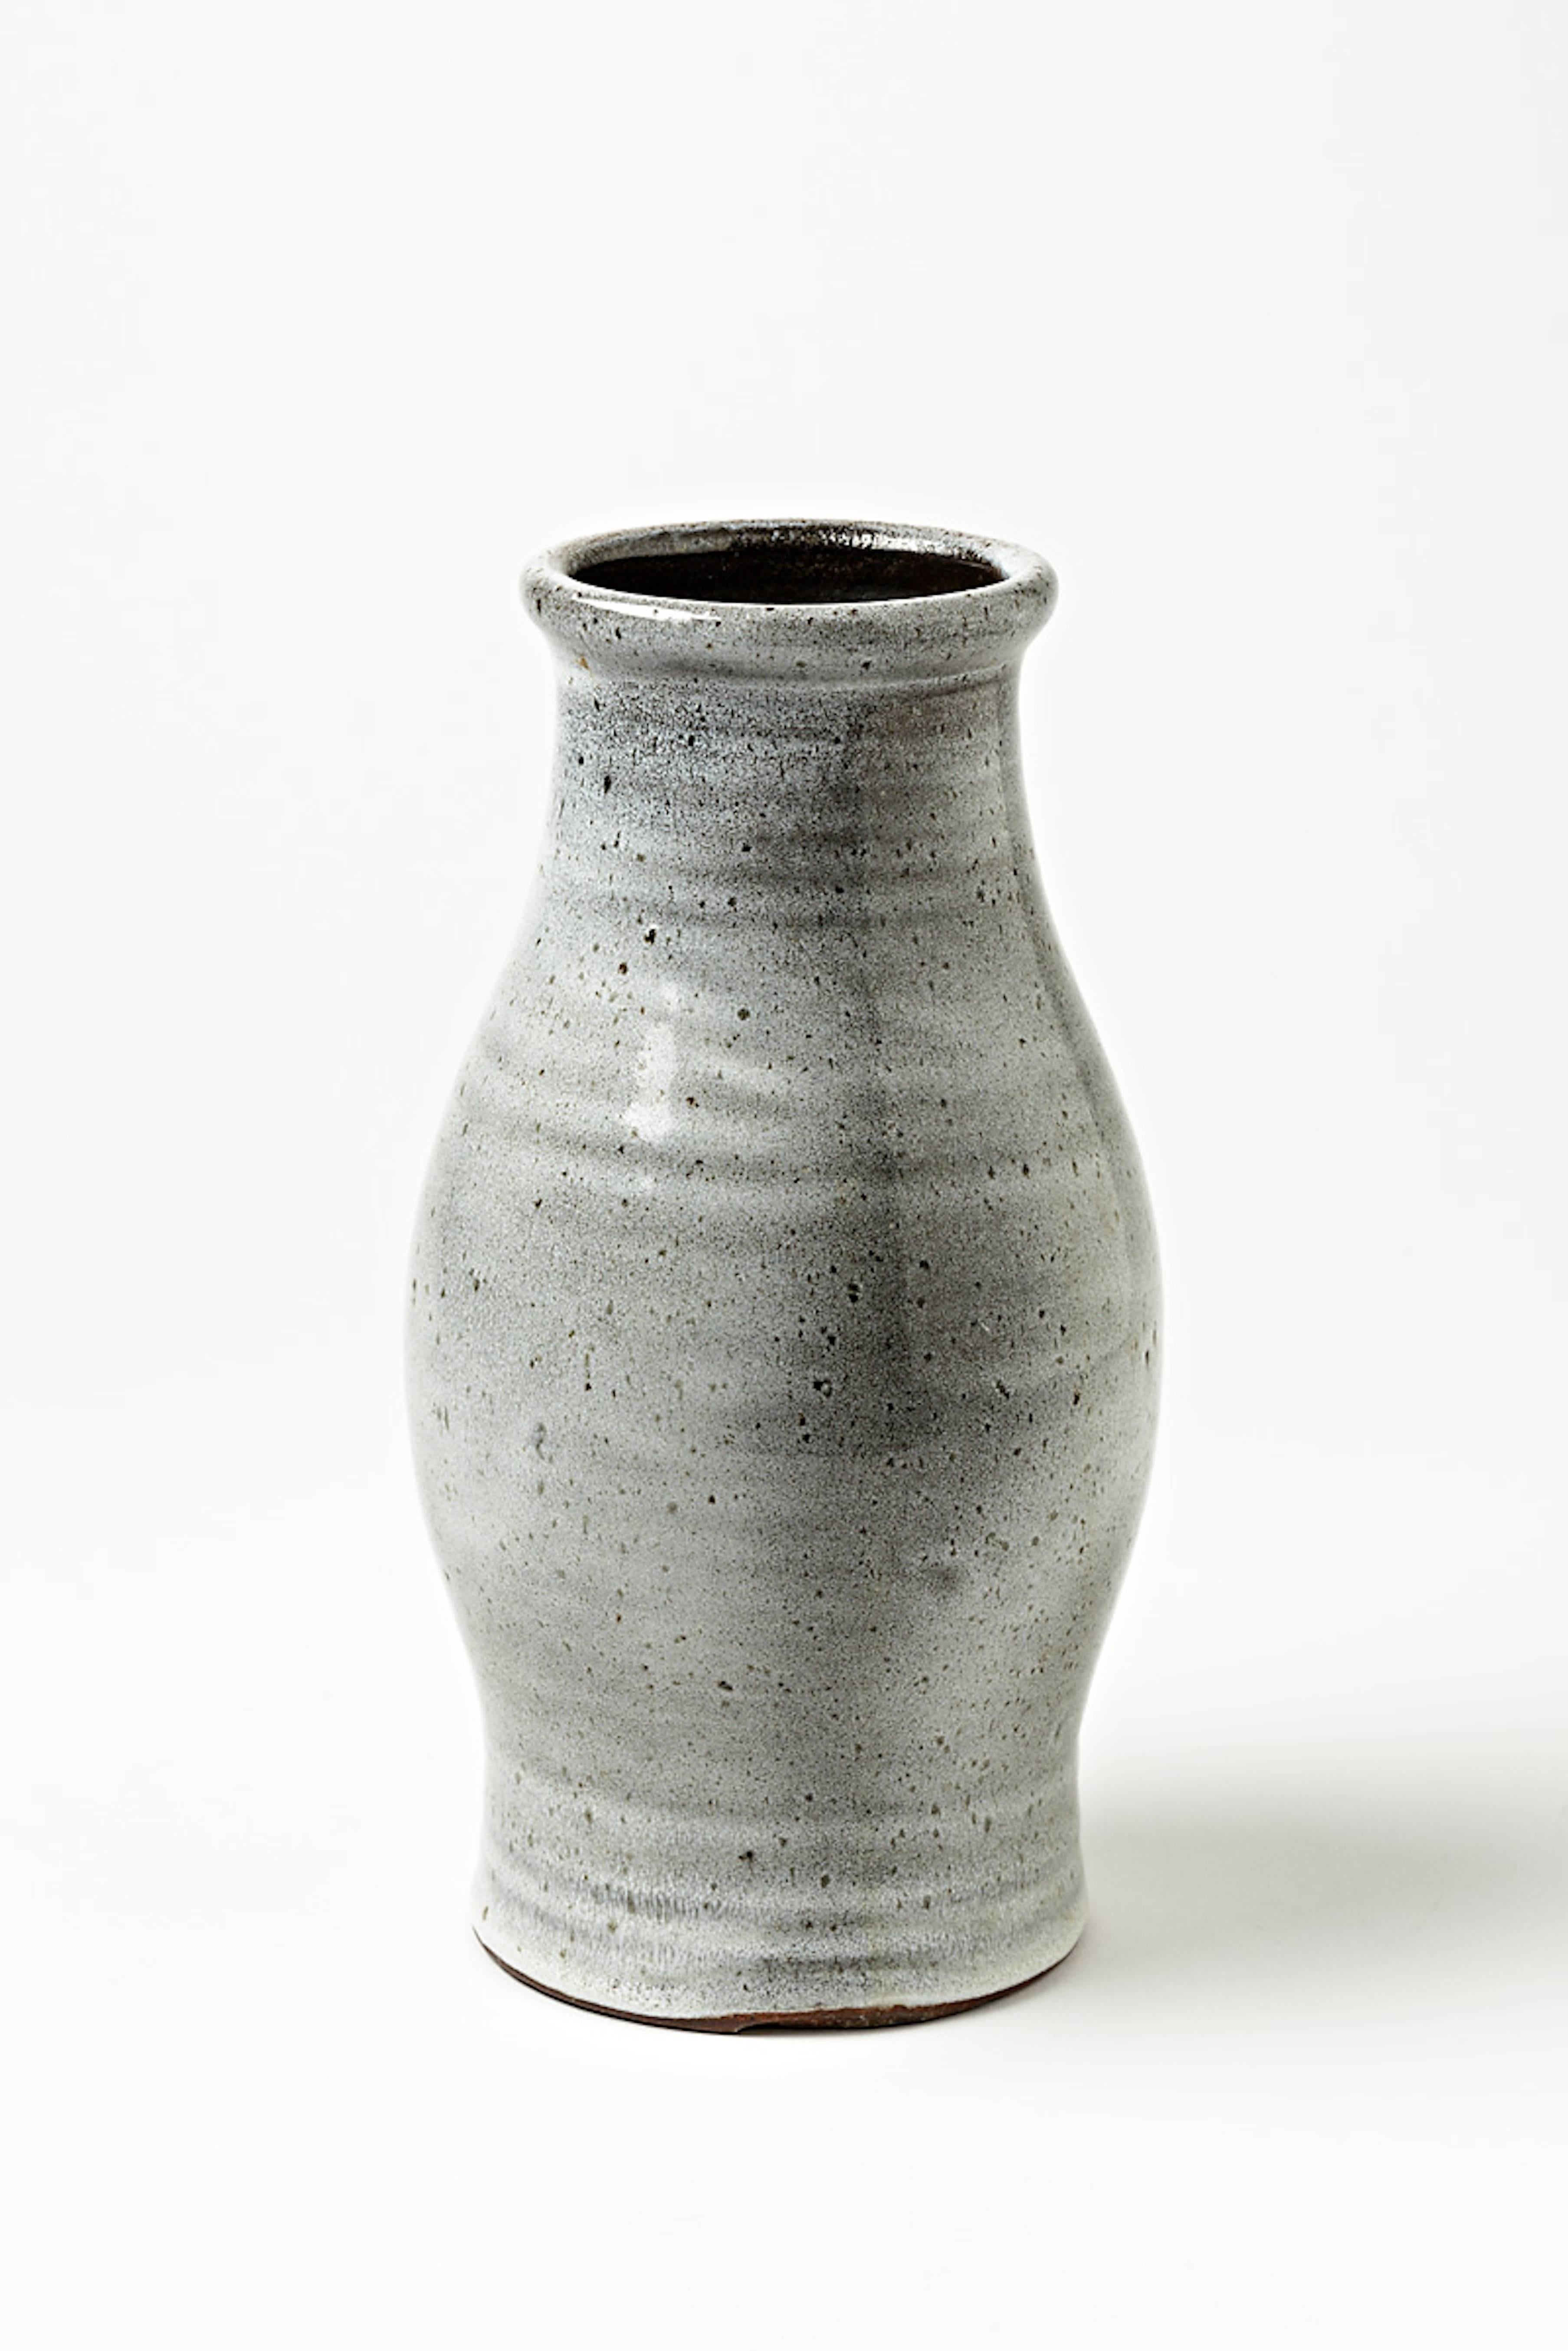 French Stoneware Vase by the Workshop Pierlot, Ratilly, France, 1970-1980 For Sale